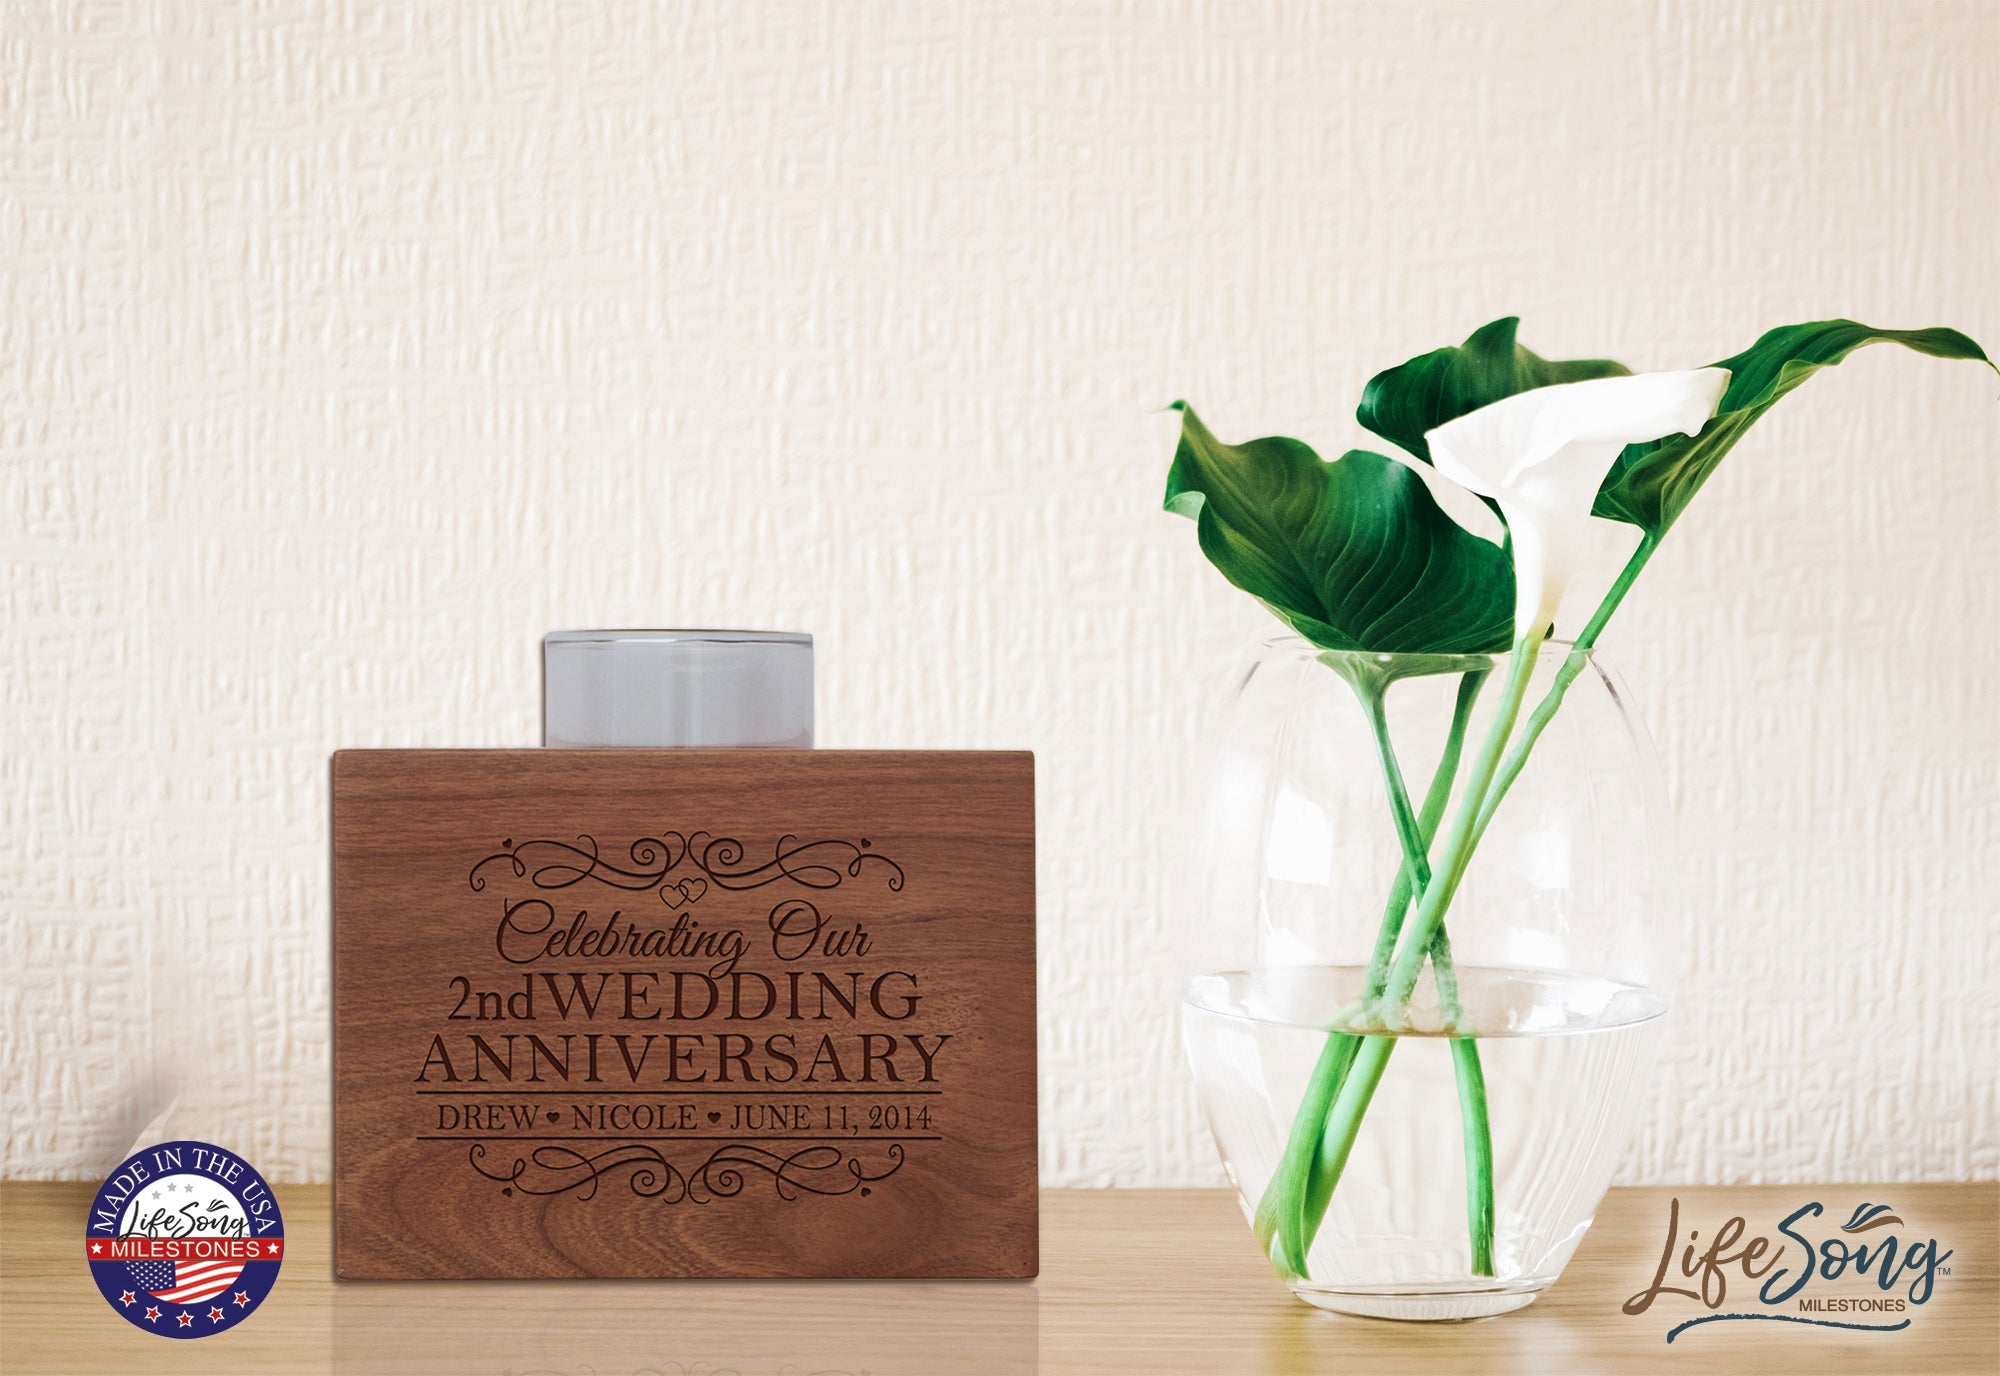 Personalized Cherry Wood Single Votive Candle Holder - 2nd Anniversary - LifeSong Milestones